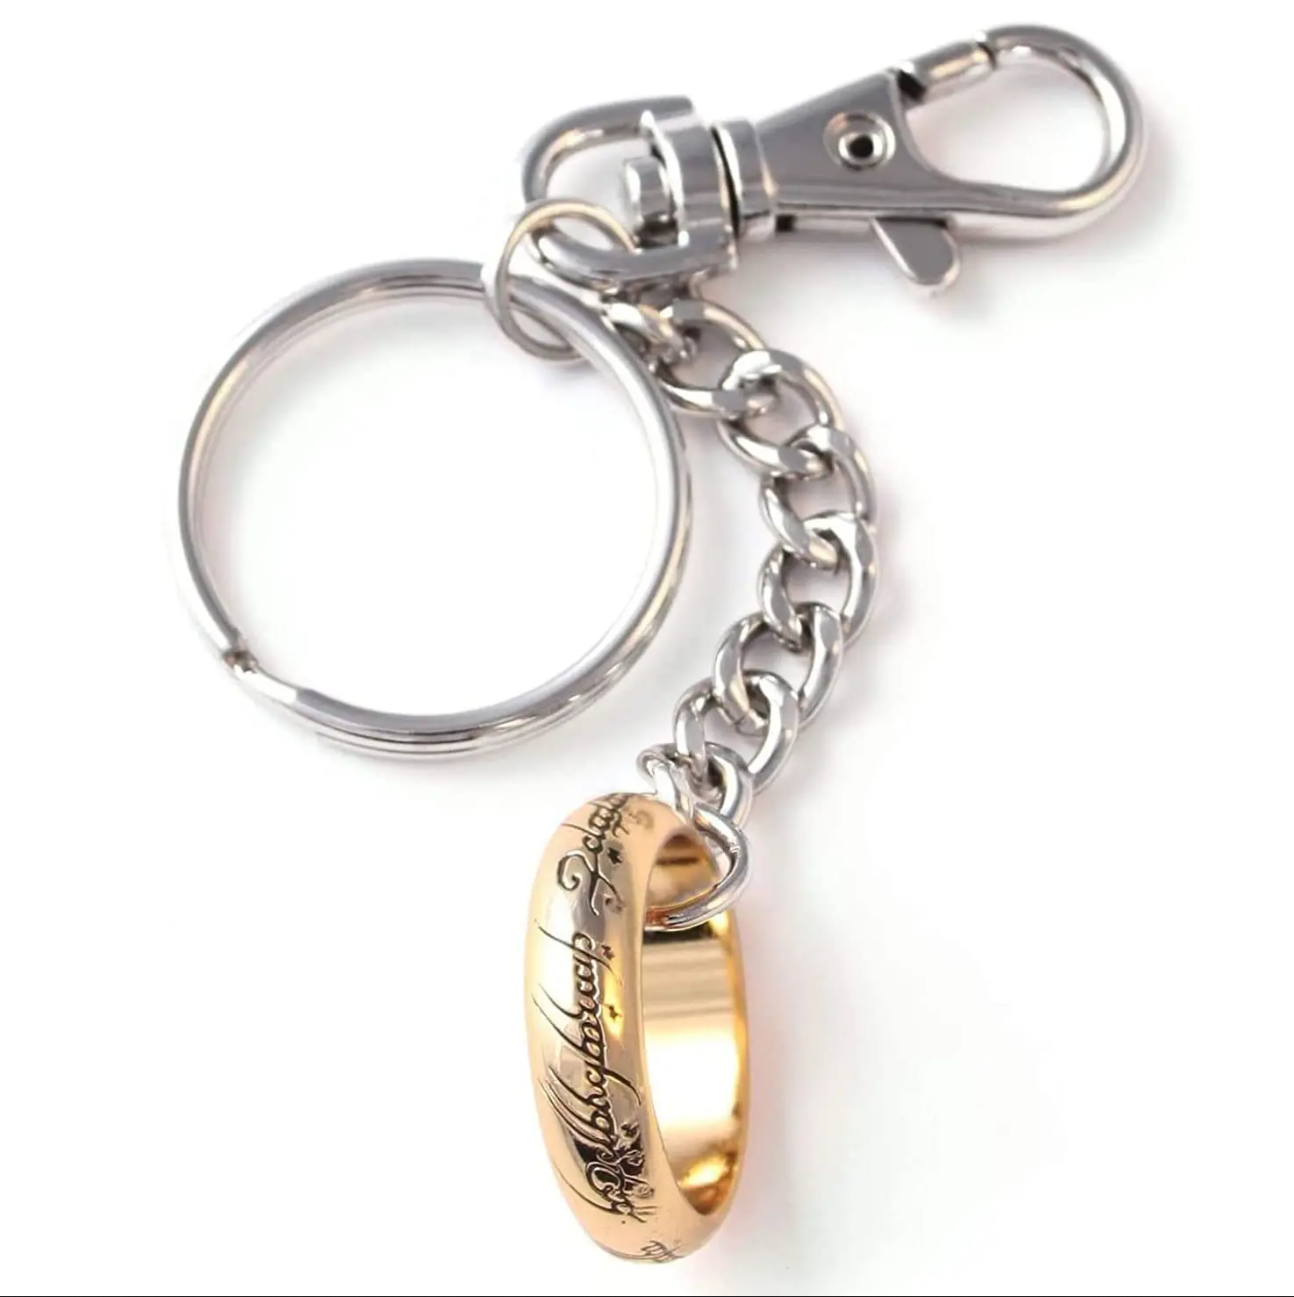 The One Ring Keychain